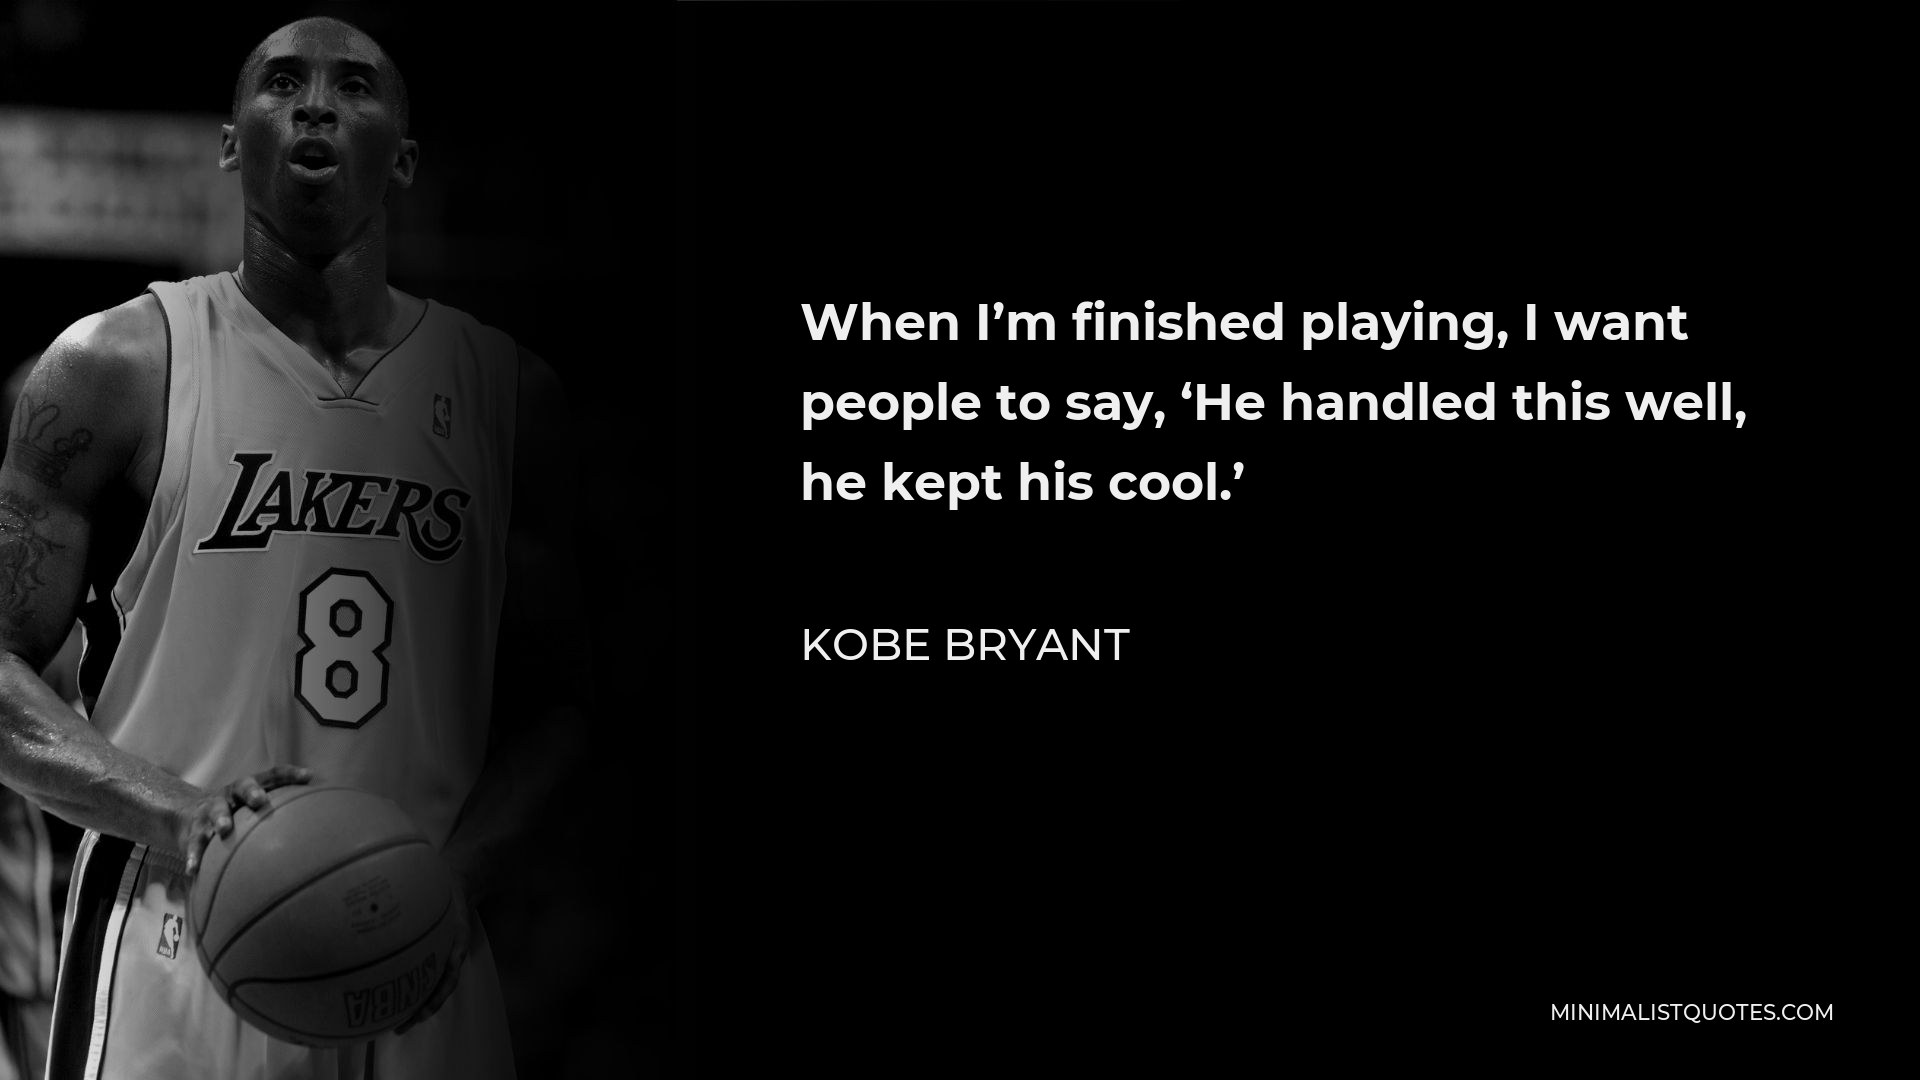 Kobe Bryant Quote - When I’m finished playing, I want people to say, ‘He handled this well, he kept his cool.’